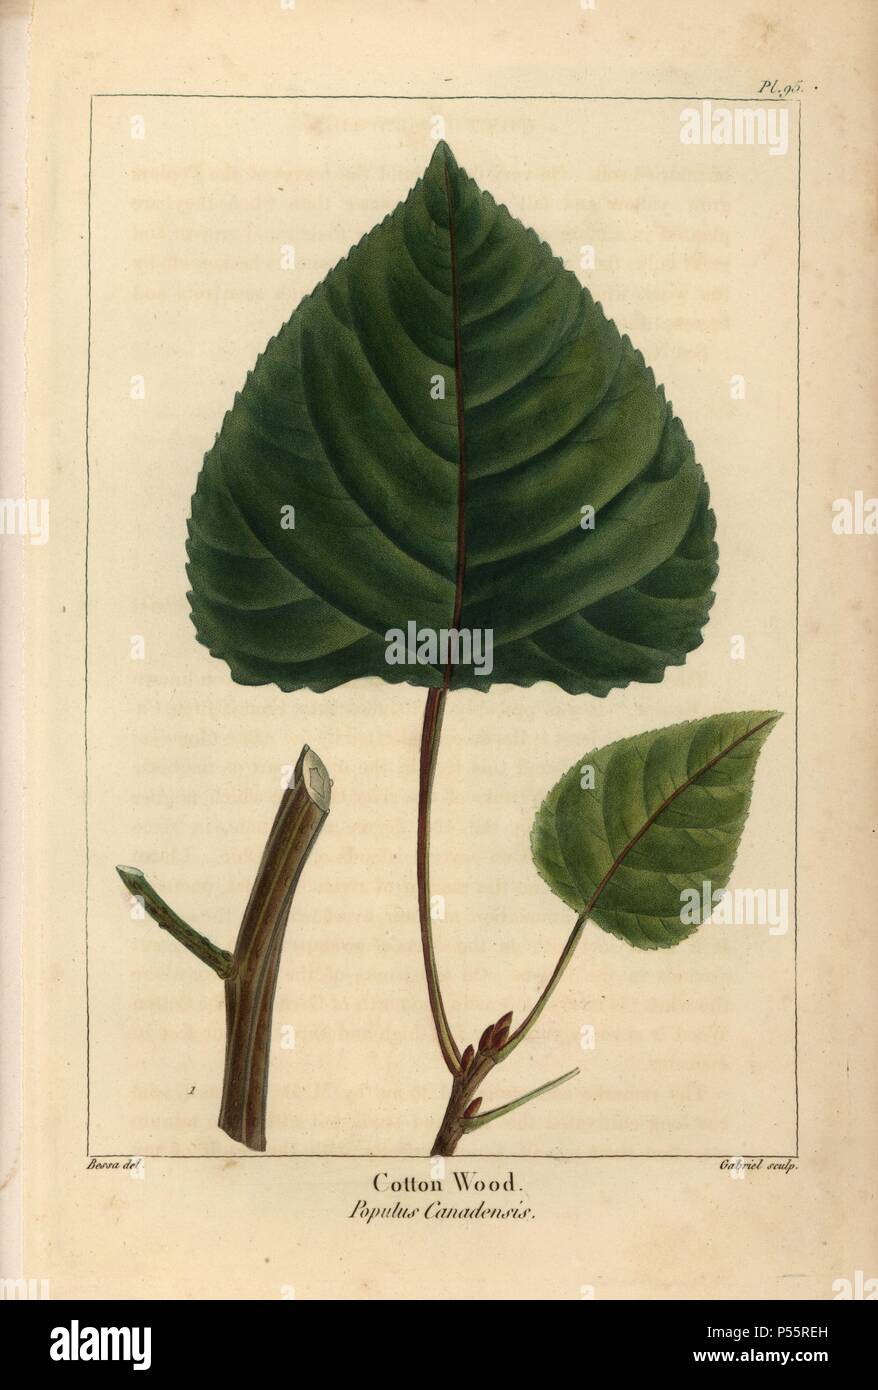 Leaf and branch of the cottonwood tree or Canadian poplar, Populus canadensis. Handcolored stipple engraving from a botanical illustration by Pancrace Bessa, engraved on copper by Gabriel, from Francois Andre Michaux's 'North American Sylva,' Philadelphia, 1857. French botanist Michaux (1770-1855) explored America and Canada in 1785 cataloging its native trees. Stock Photo